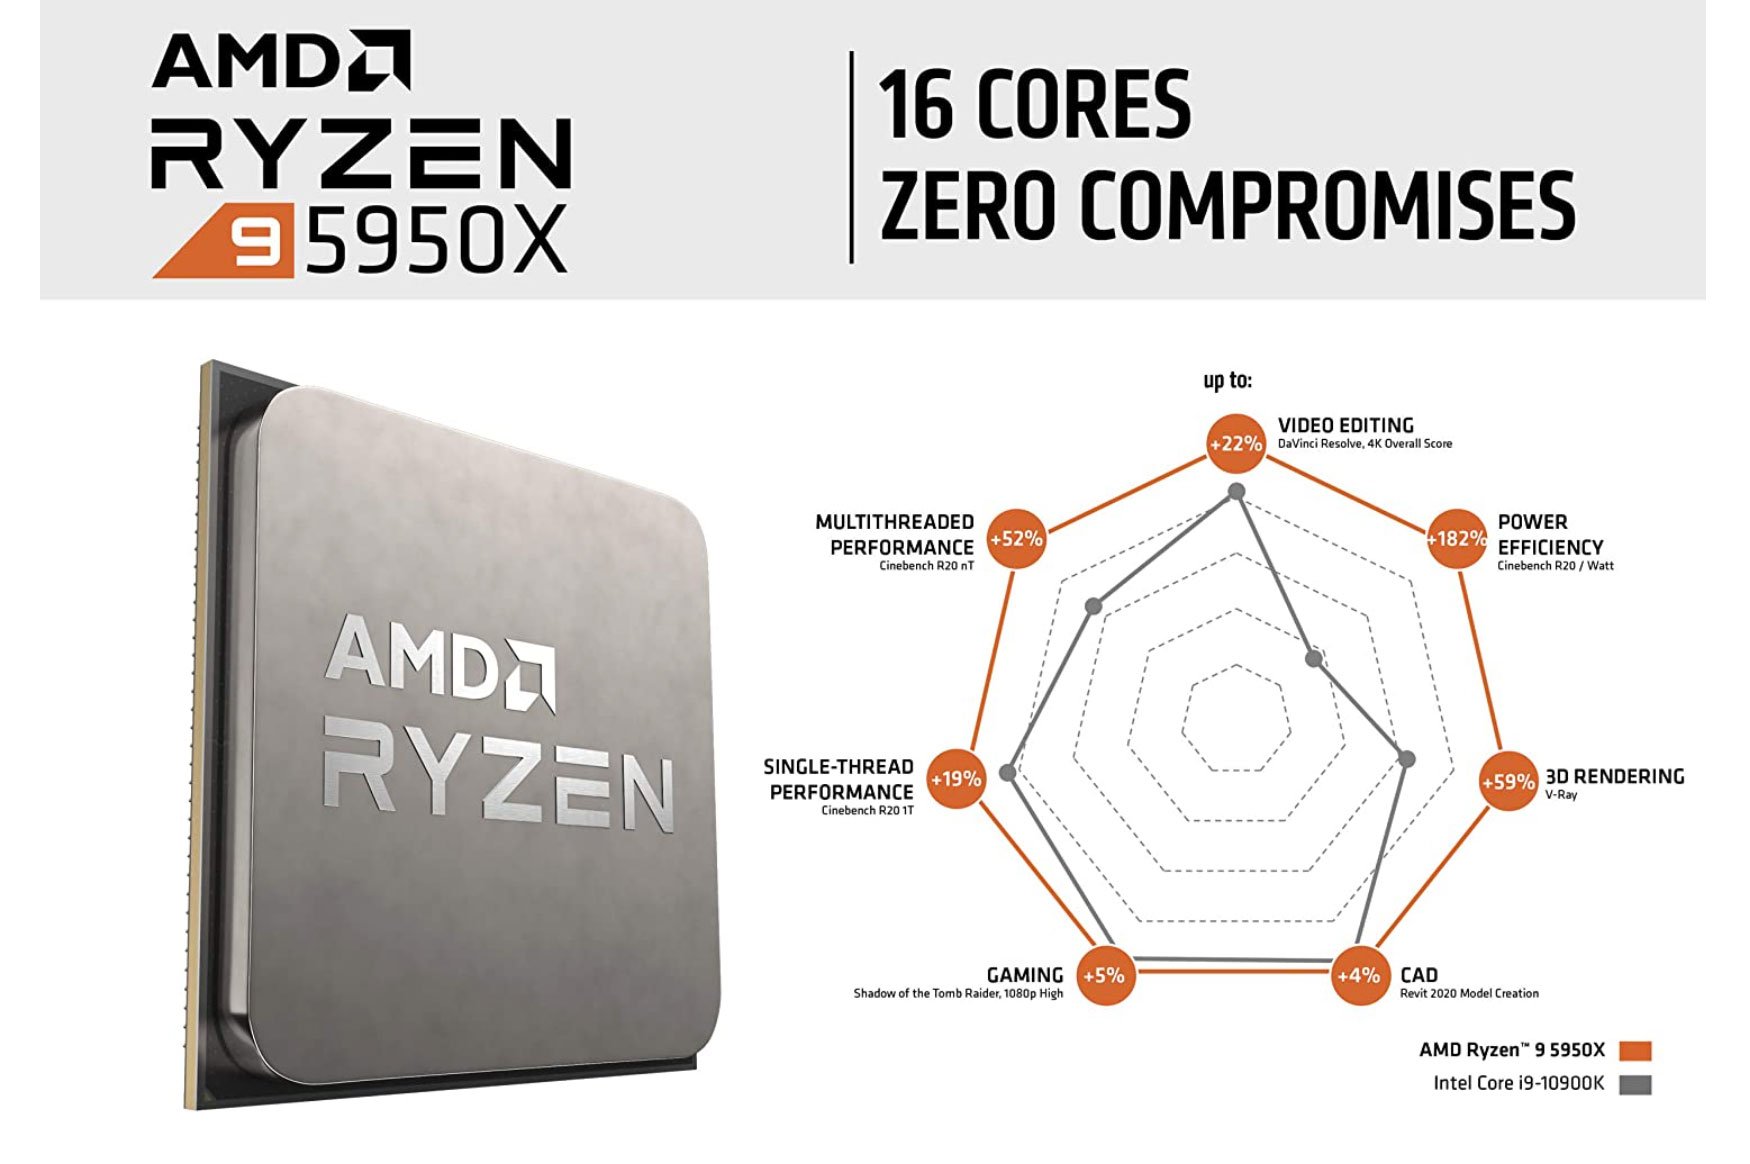 Ryzen 9 5950HX - the most powerful AMD laptops of this generation